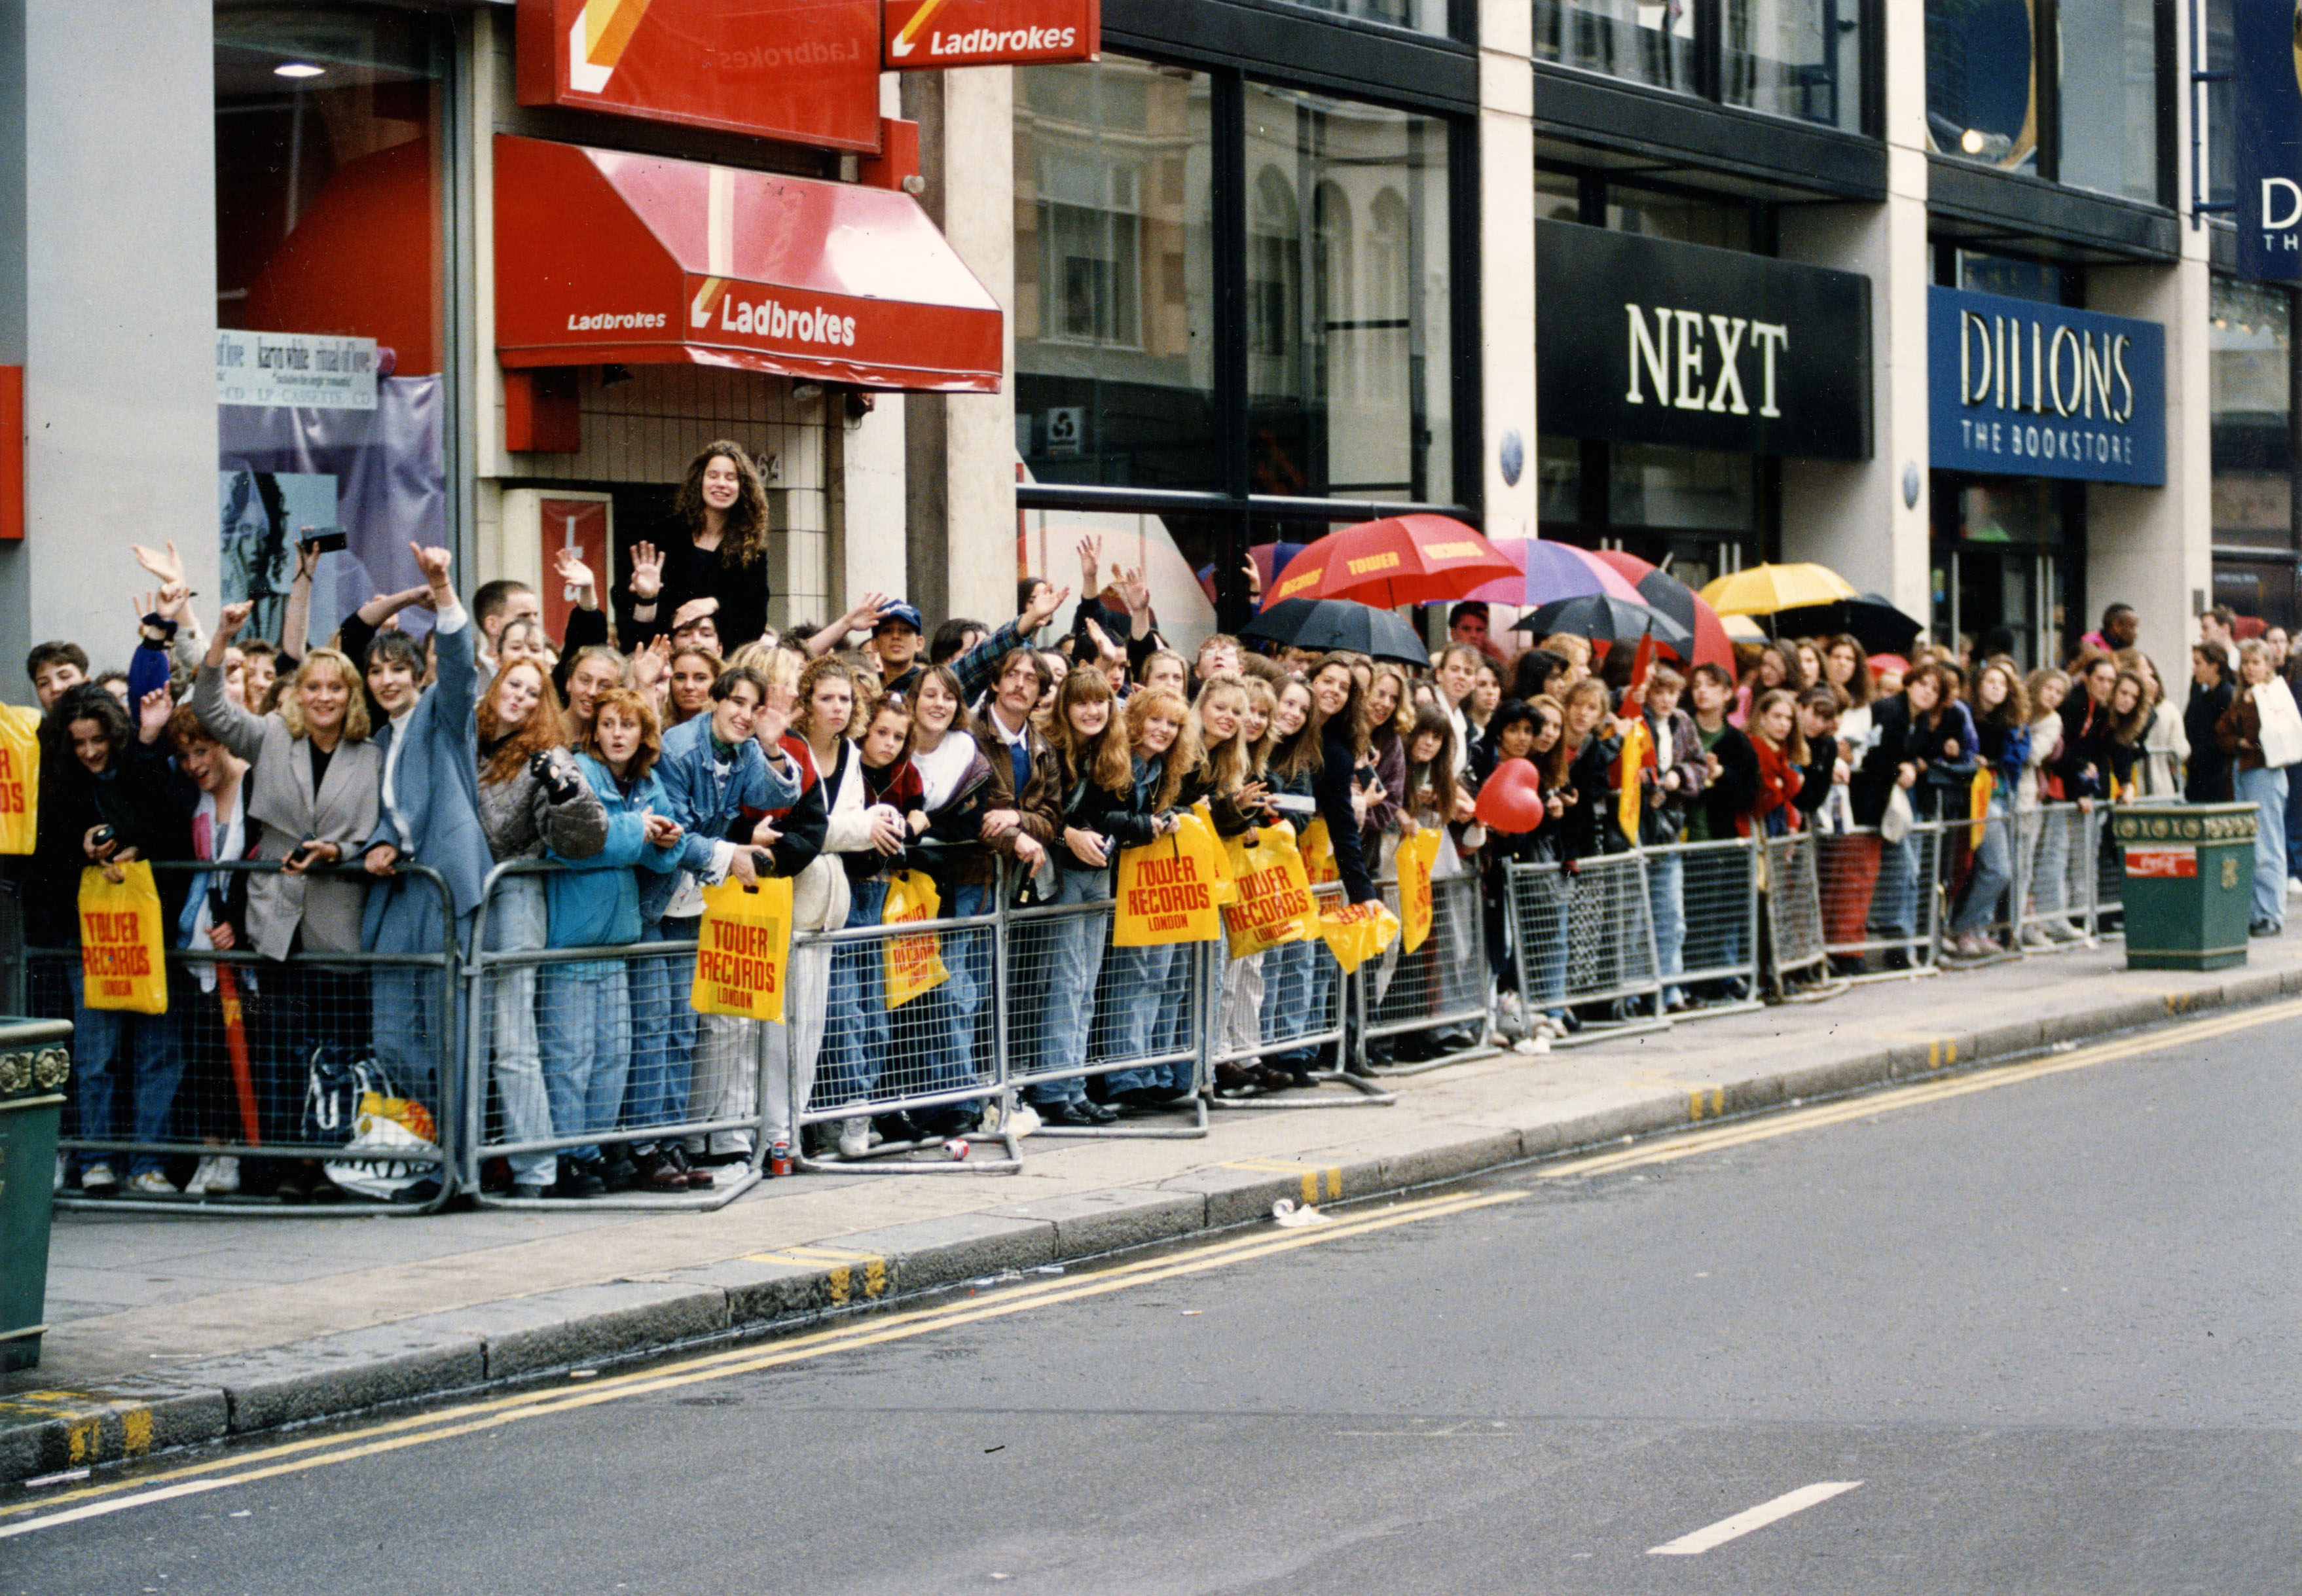 Bros Fans Queue Outside Tower Records In Kensington Where Bros Were Making A Personal Appearance - 29 Sep 1991